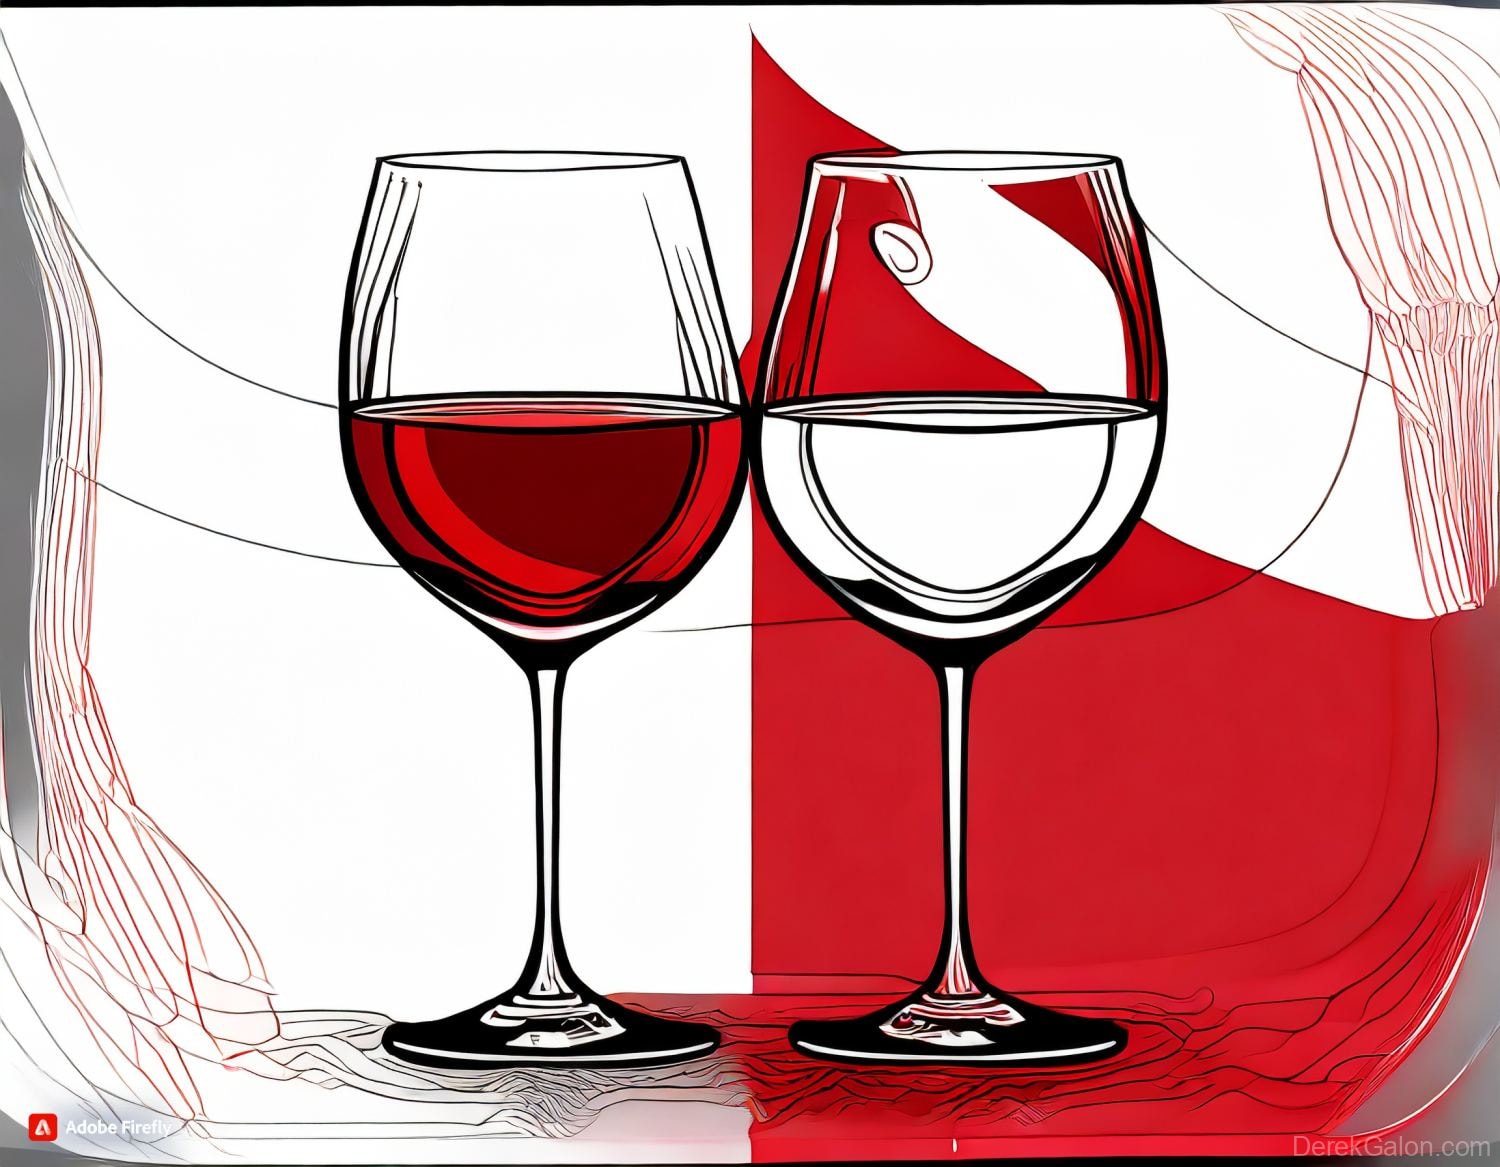 Firefly-two-glasses-of-wine-white-and-red.-composed-on-front-of-polish-flag-white-and-red-out-of-